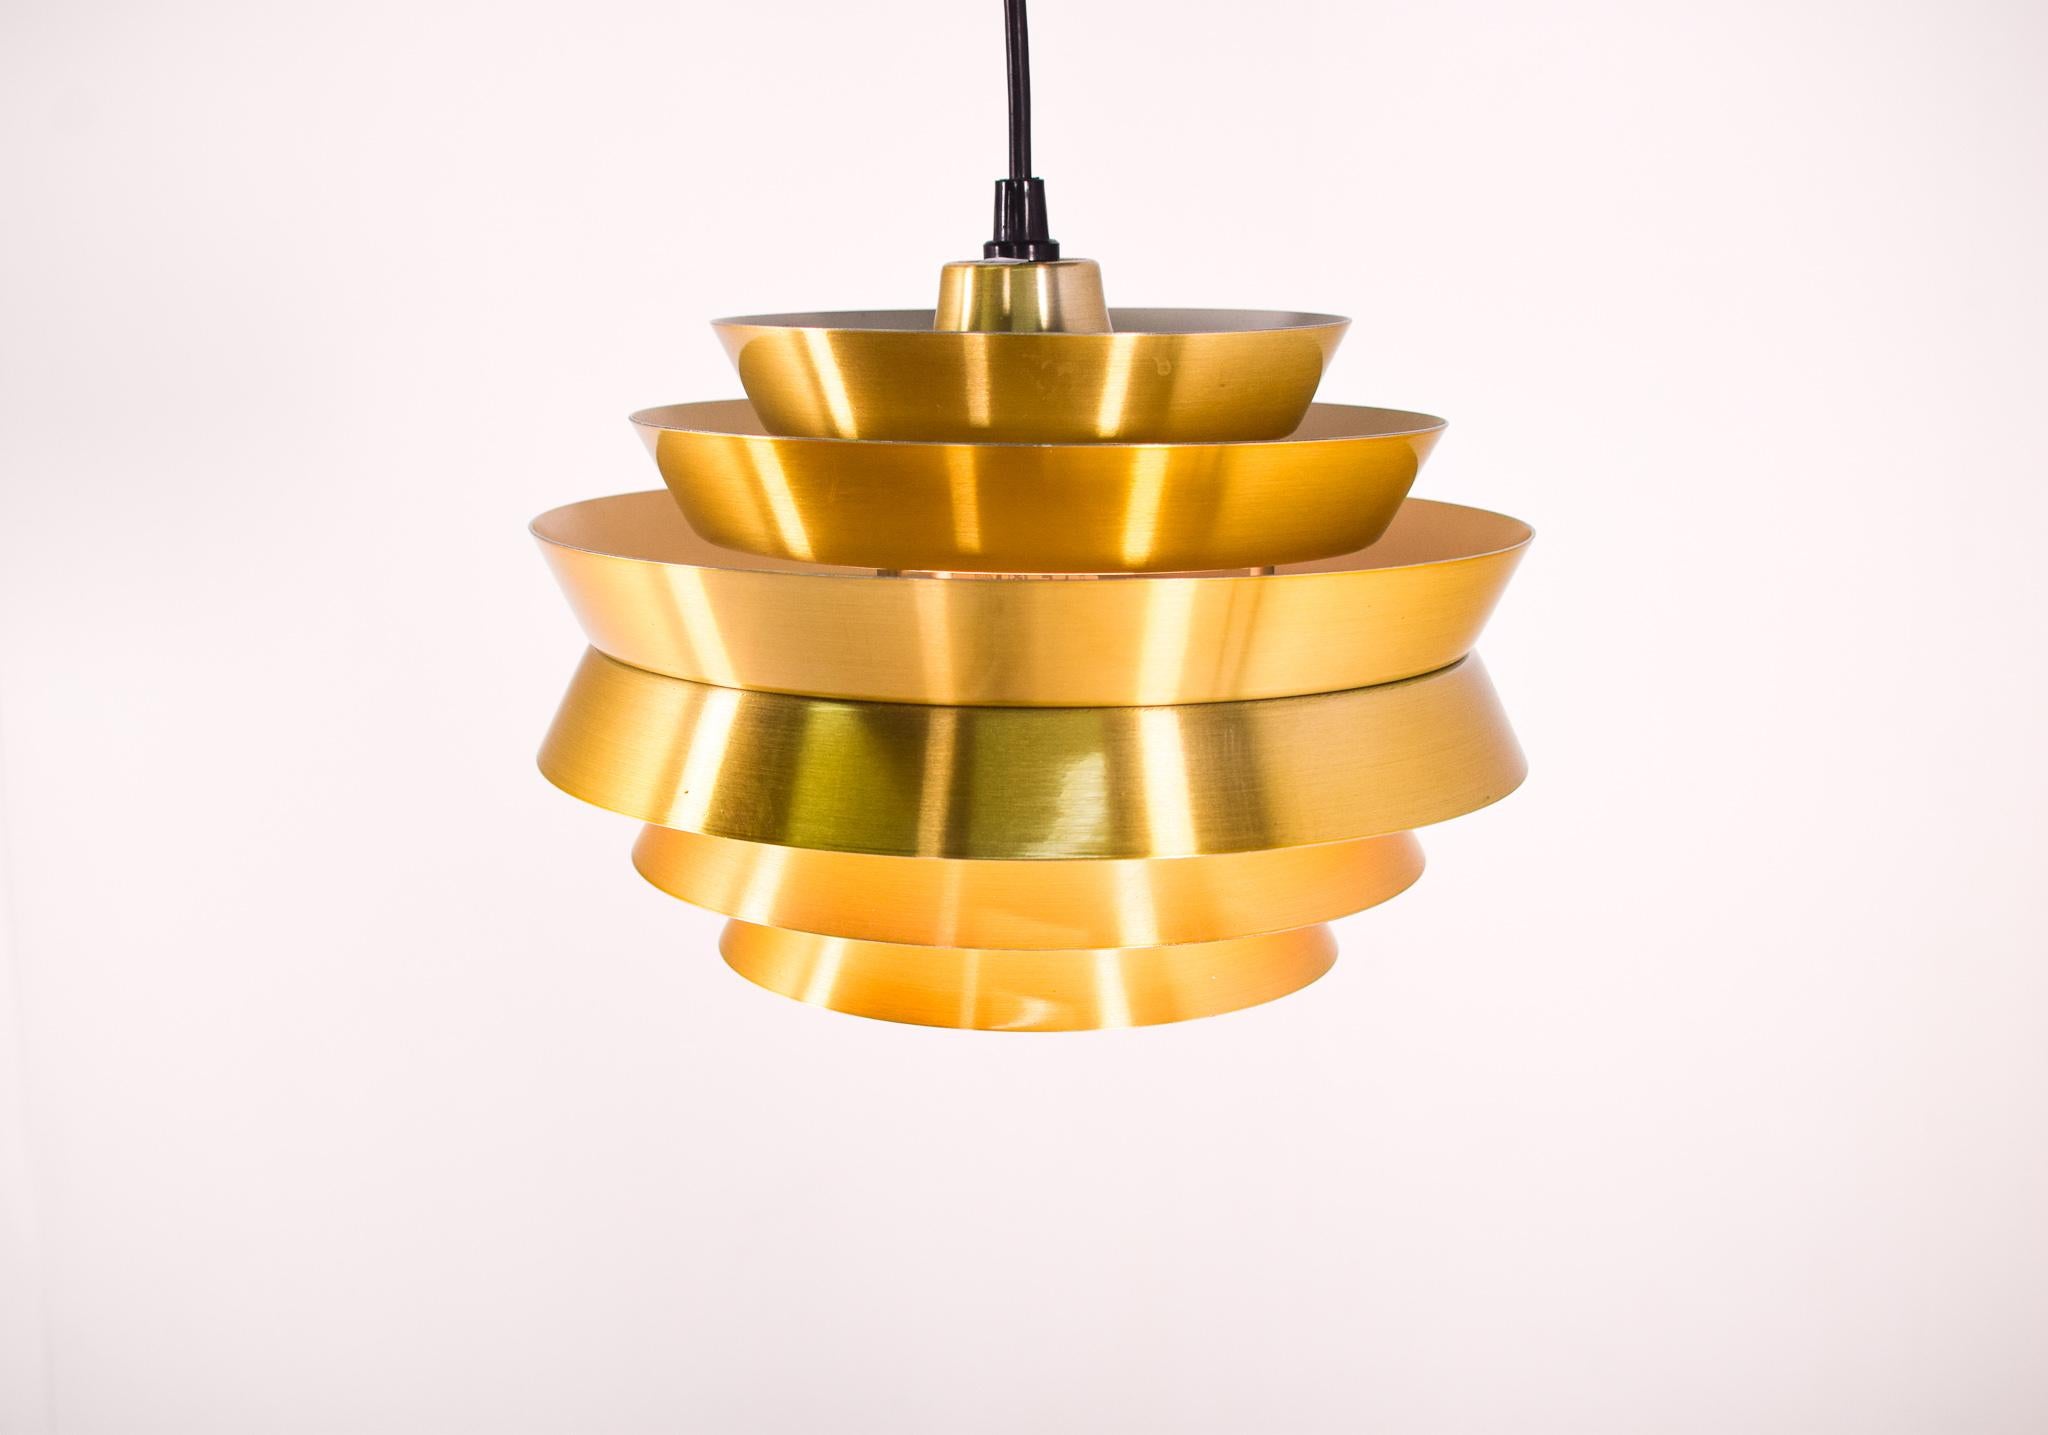 Iconic Swedish trava pendant designed by Sigurd (Carl Thore) Lindkvistfor for Granhaga Metallindustri. It’s finished in shades of metallic brass colour and the innermost shades are lacquered white on the inside so it emits a wonderful glow when lit.